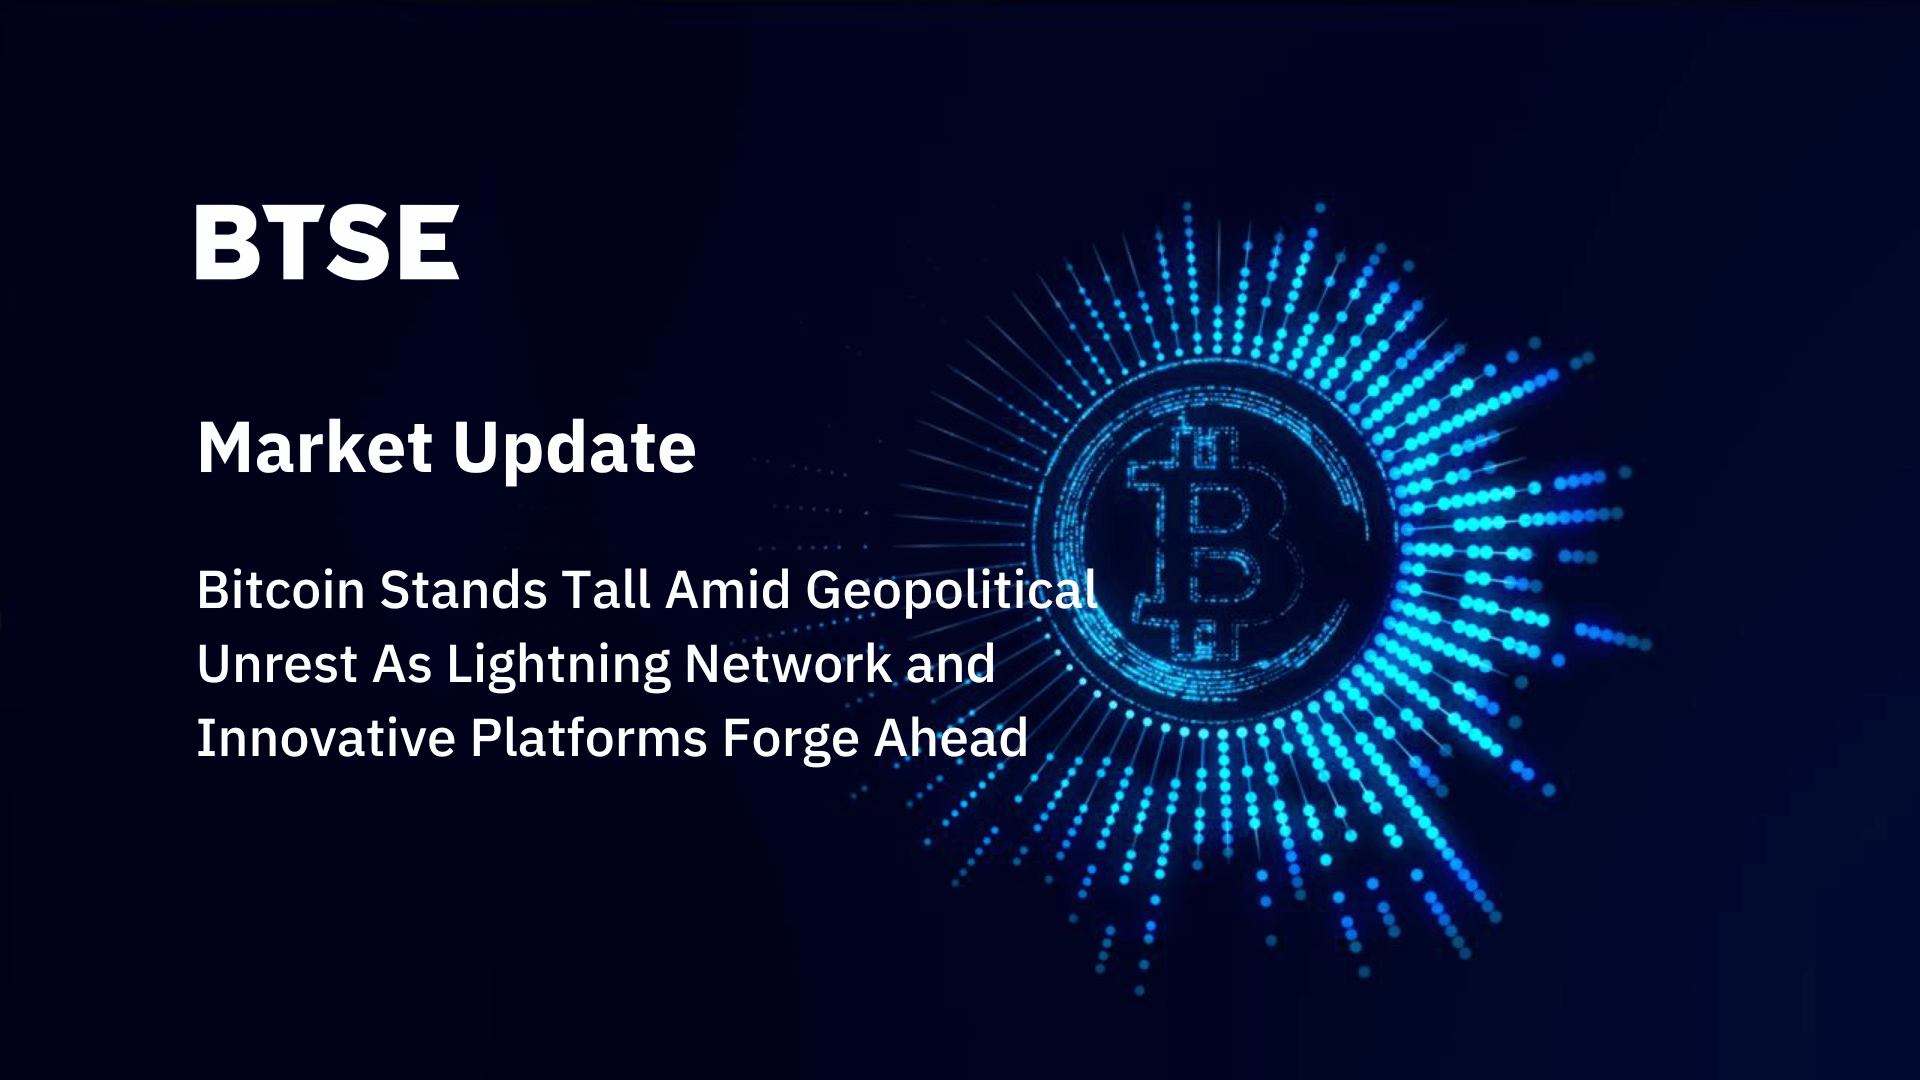 Bitcoin Stands Tall Amid Geopolitical Unrest As Lightning Network and Innovative Platforms Forge Ahead